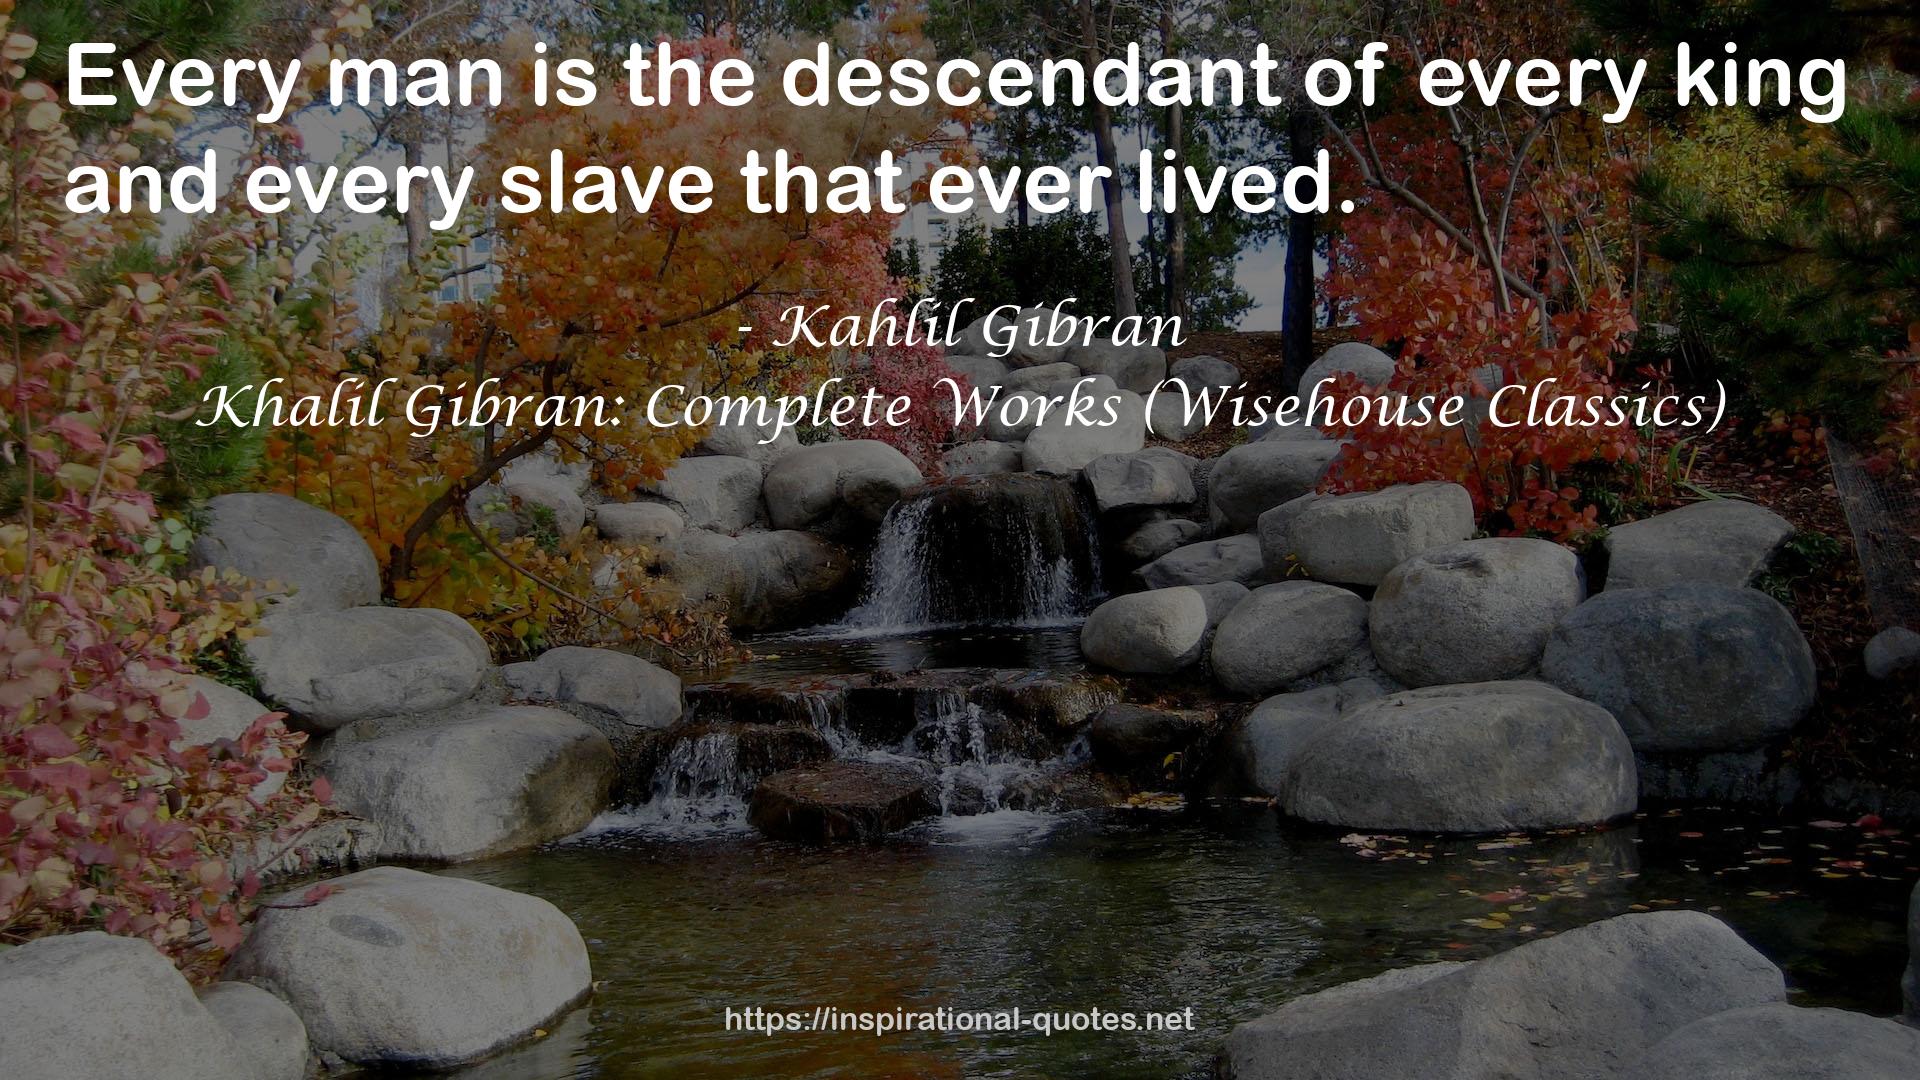 Khalil Gibran: Complete Works (Wisehouse Classics) QUOTES